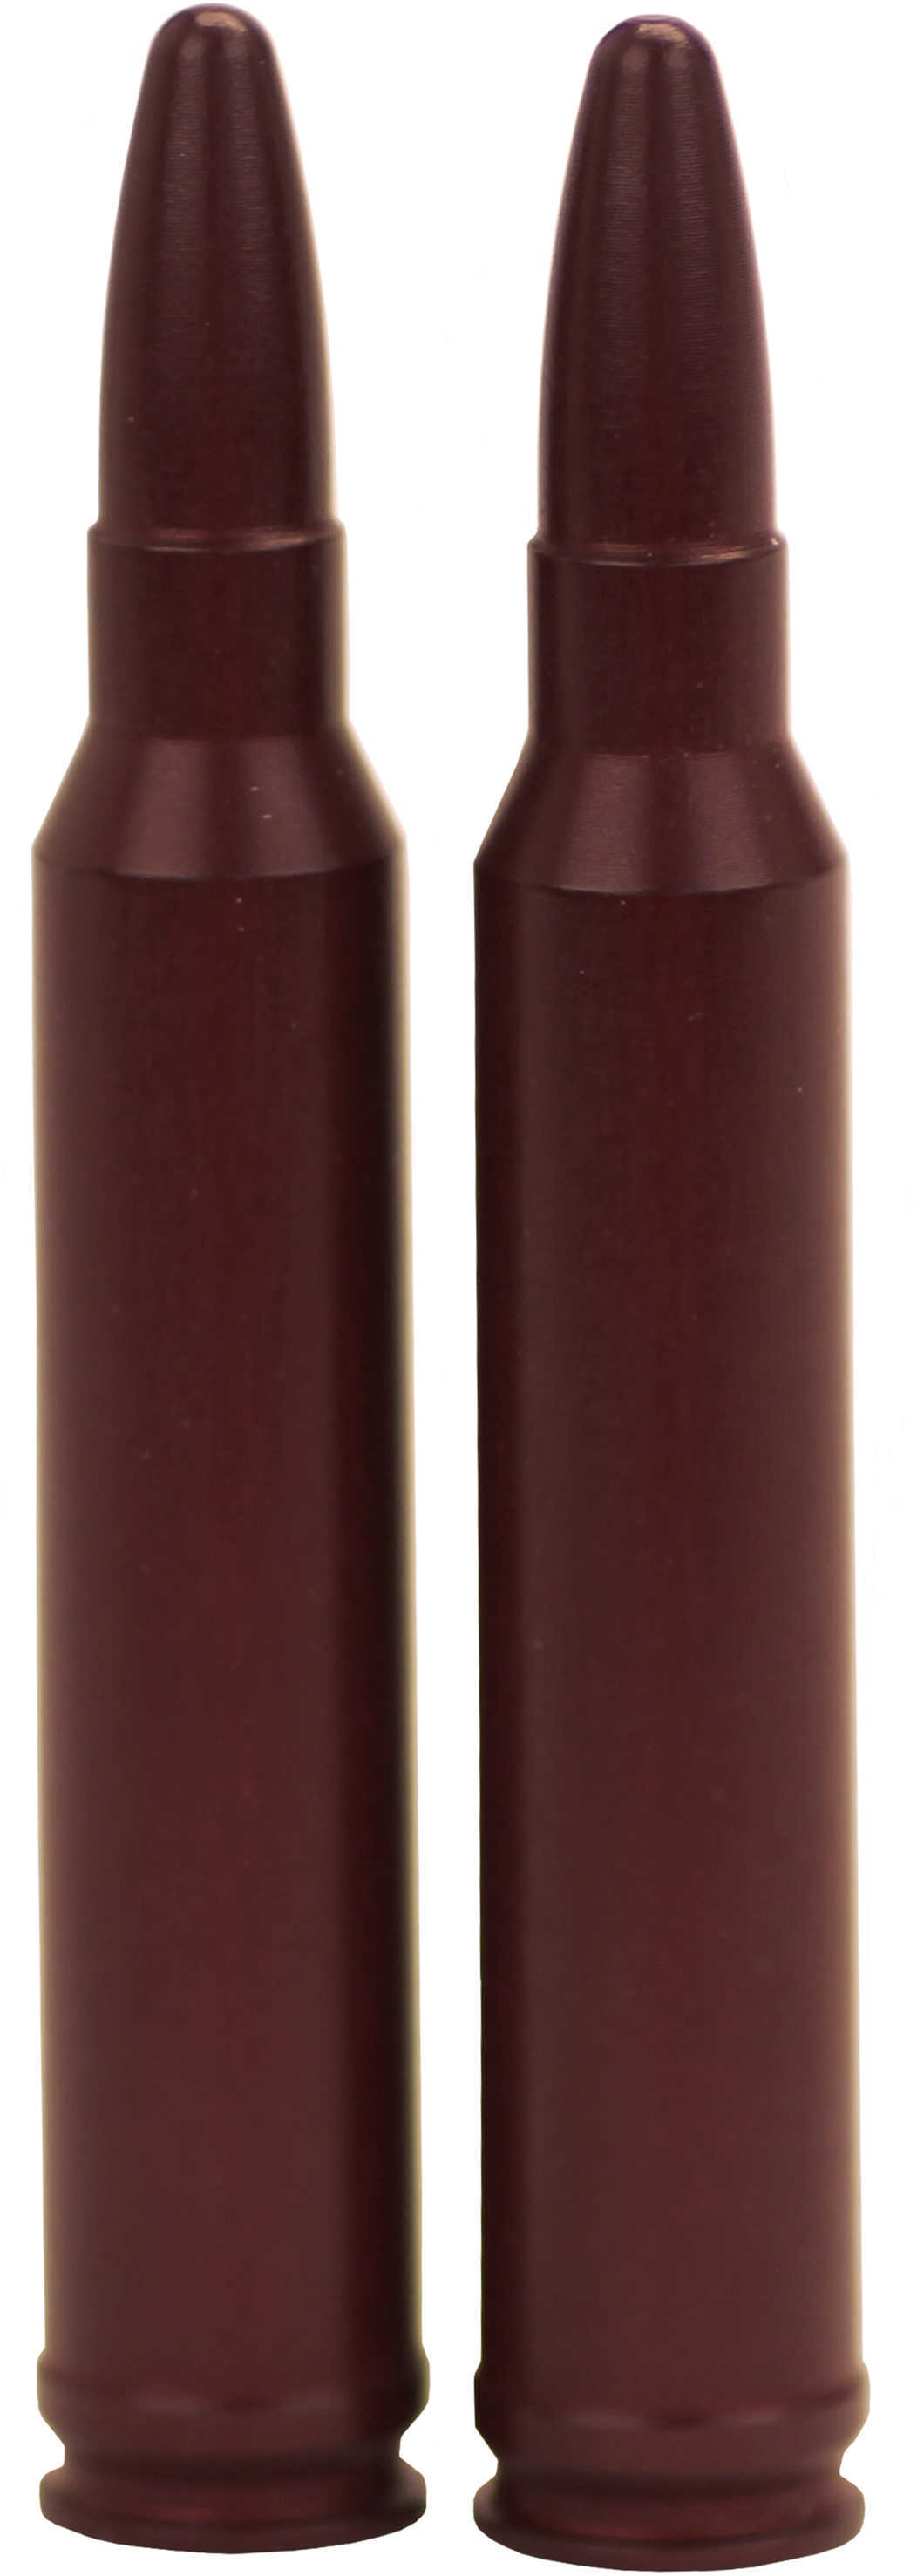 Pachmayr Rifle Metal Snap Caps 300 Win Mag Per 2 Md: 12237